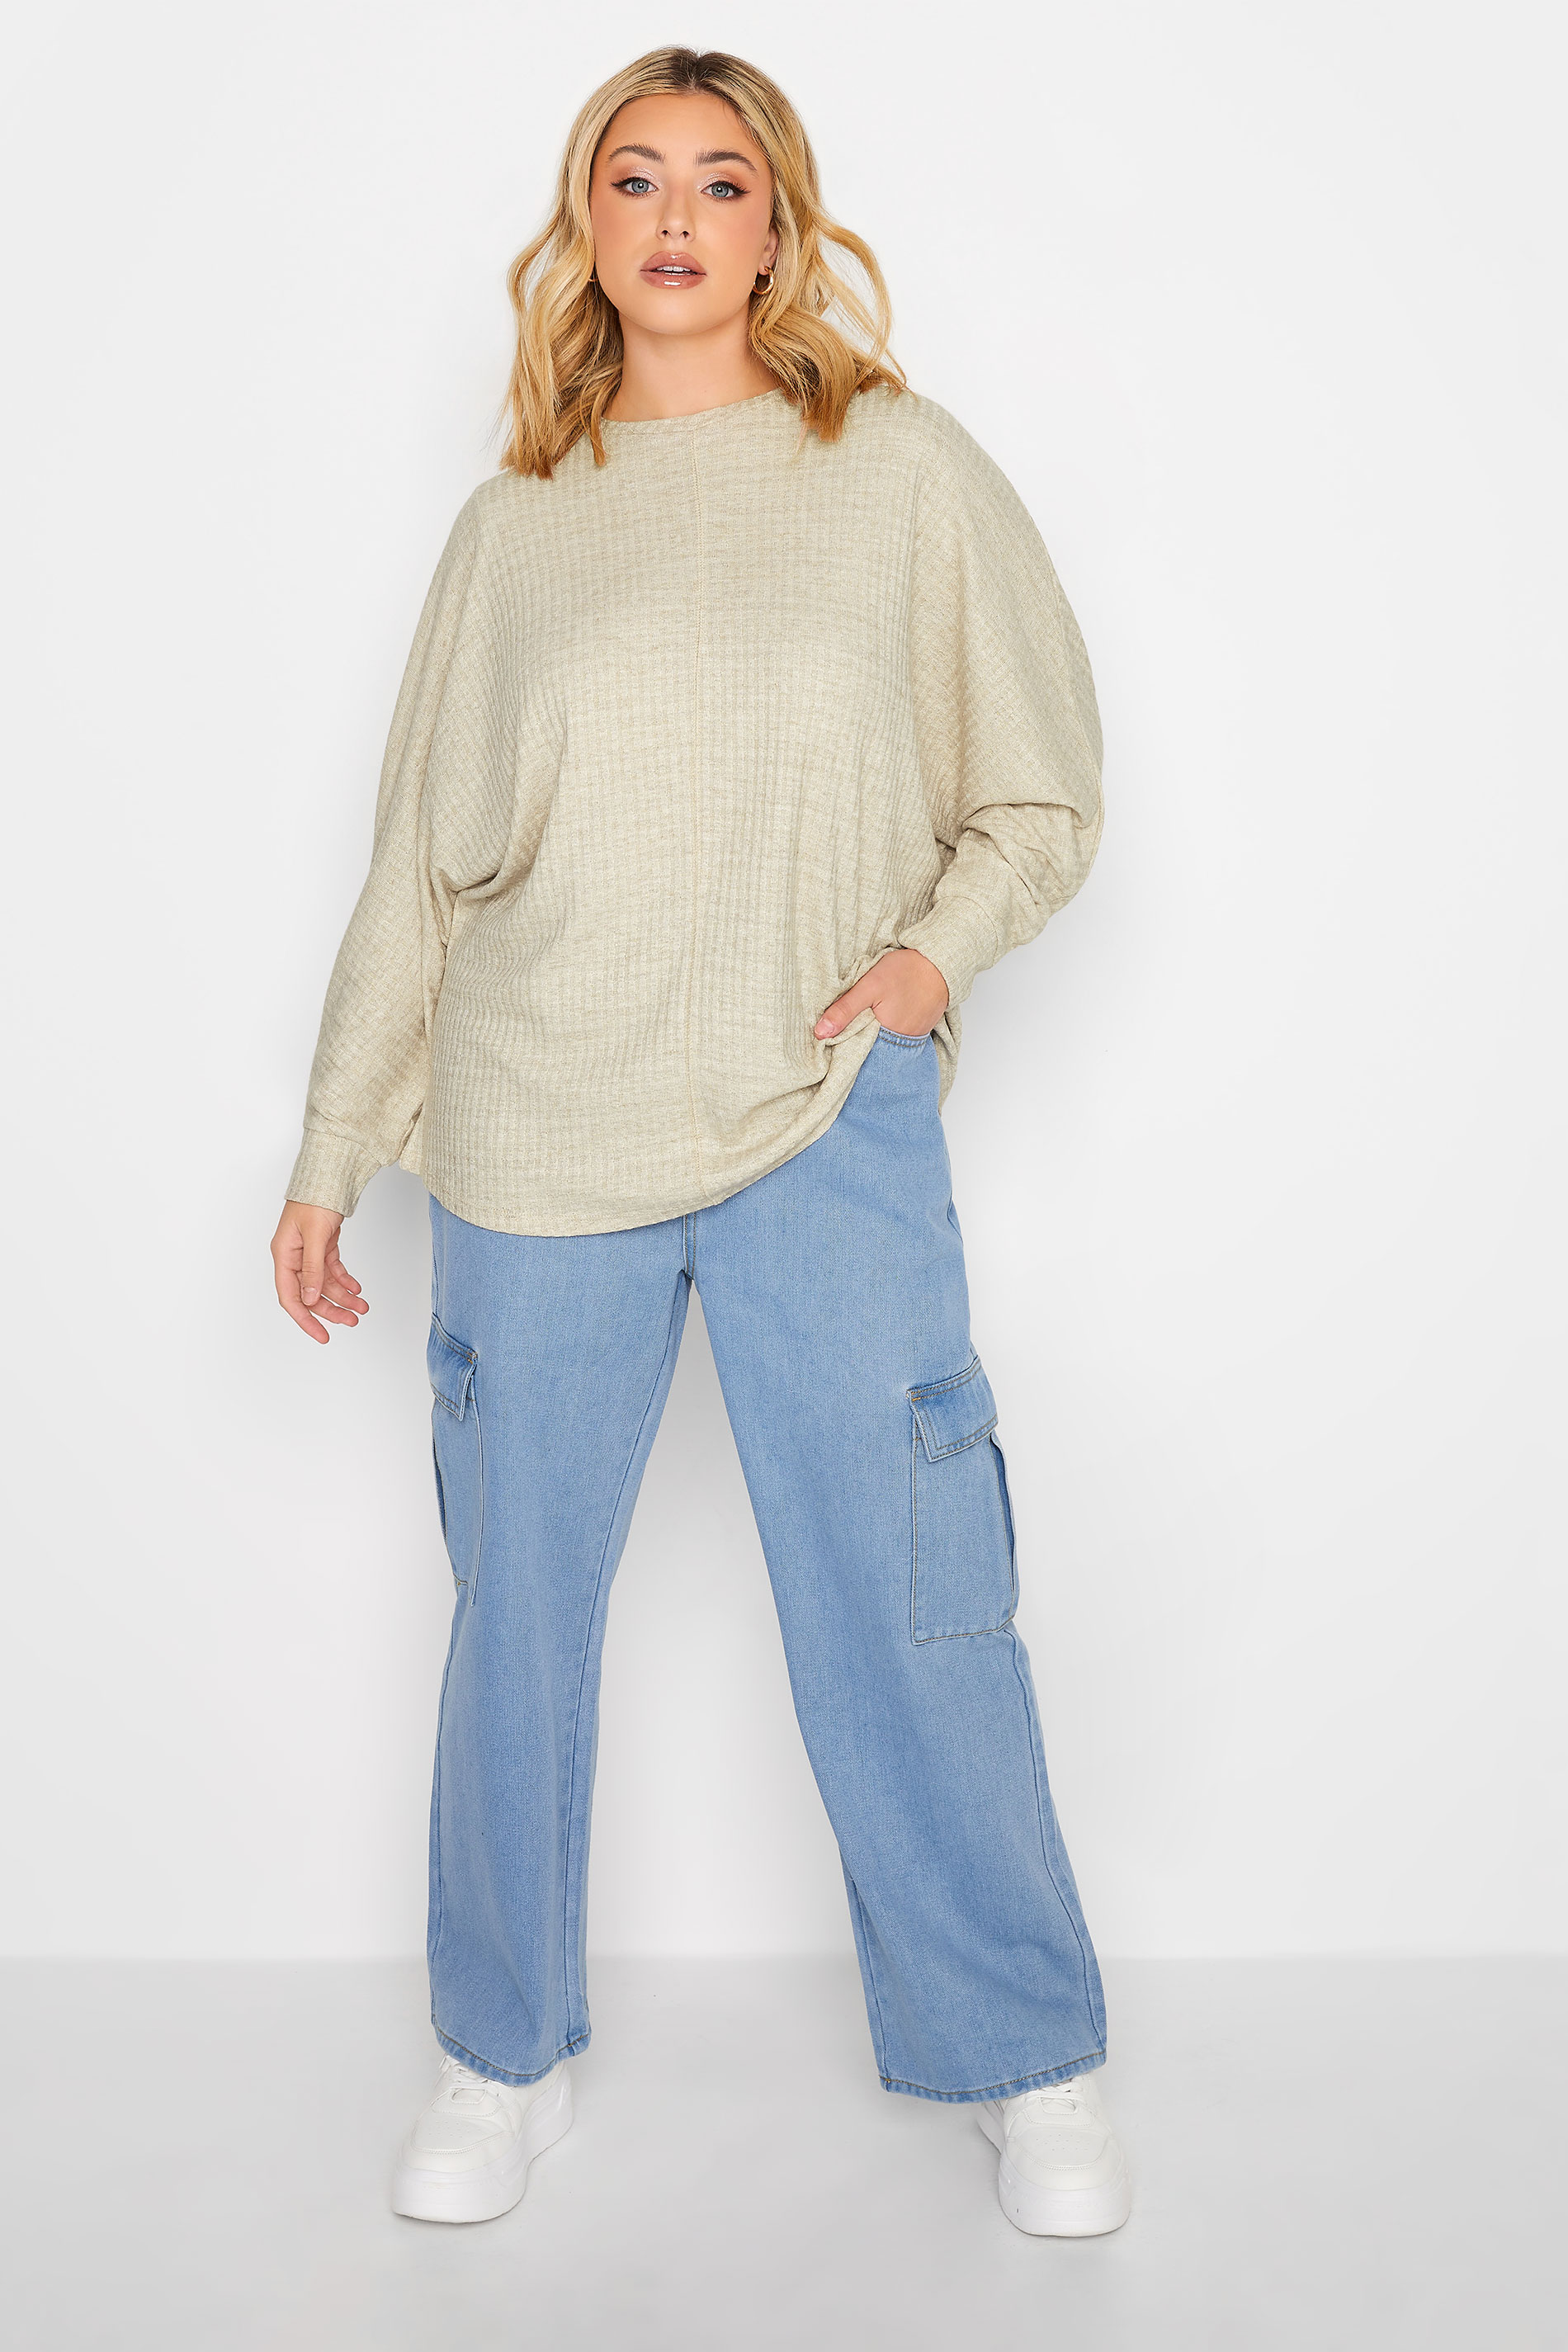 YOURS Plus Size Ivory White Soft Touch Ribbed Top | Yours Clothing 2